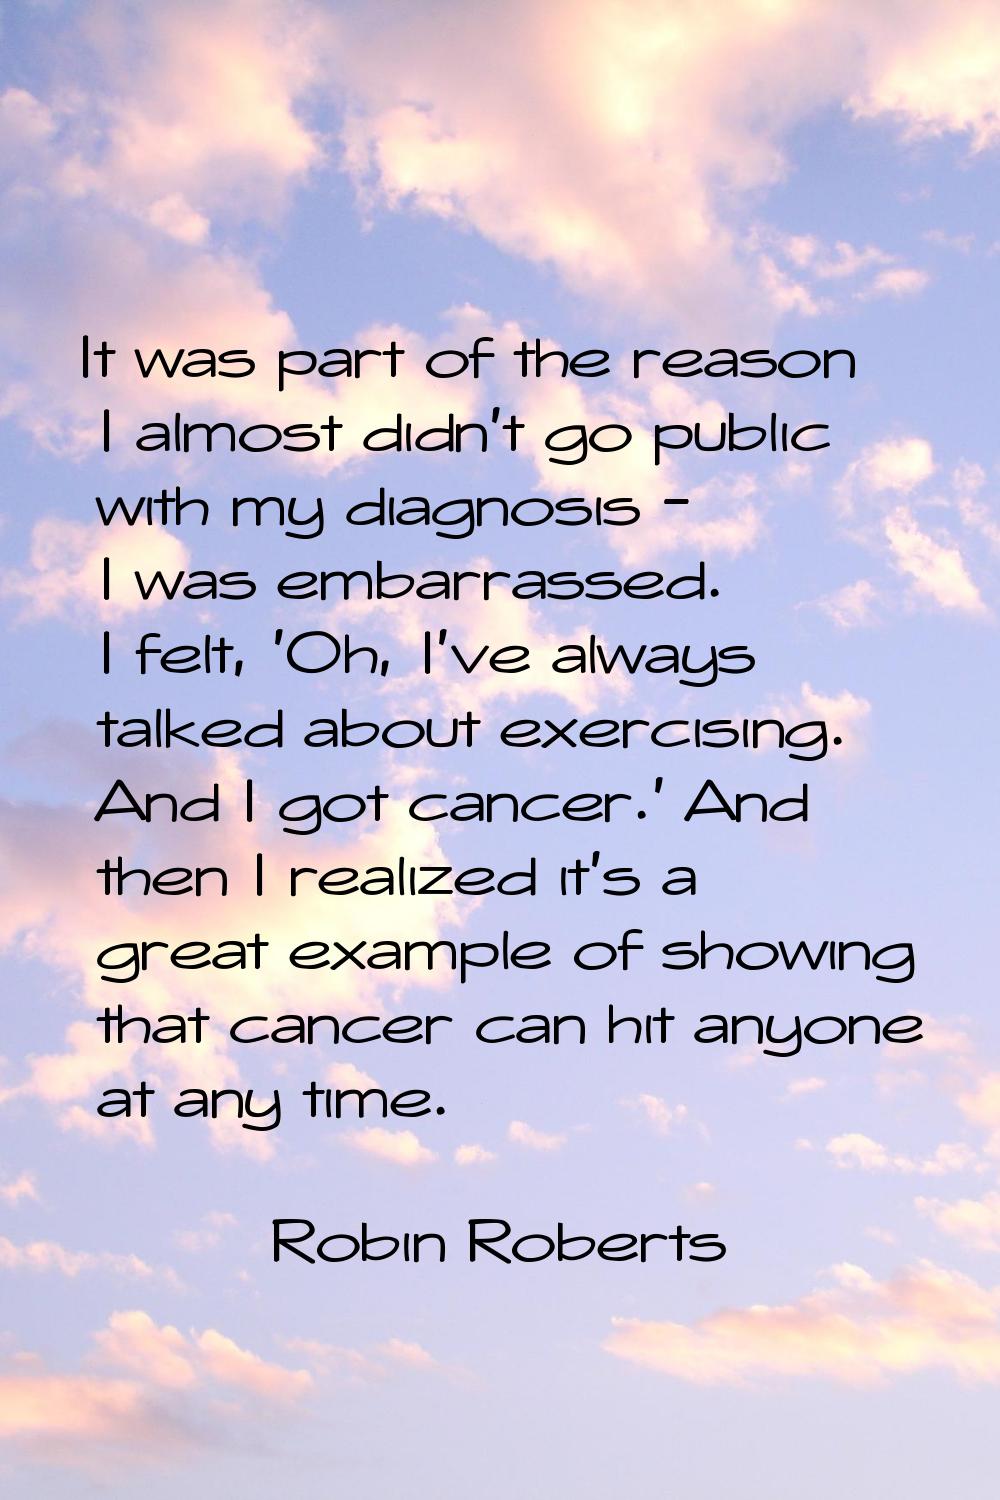 It was part of the reason I almost didn't go public with my diagnosis - I was embarrassed. I felt, 